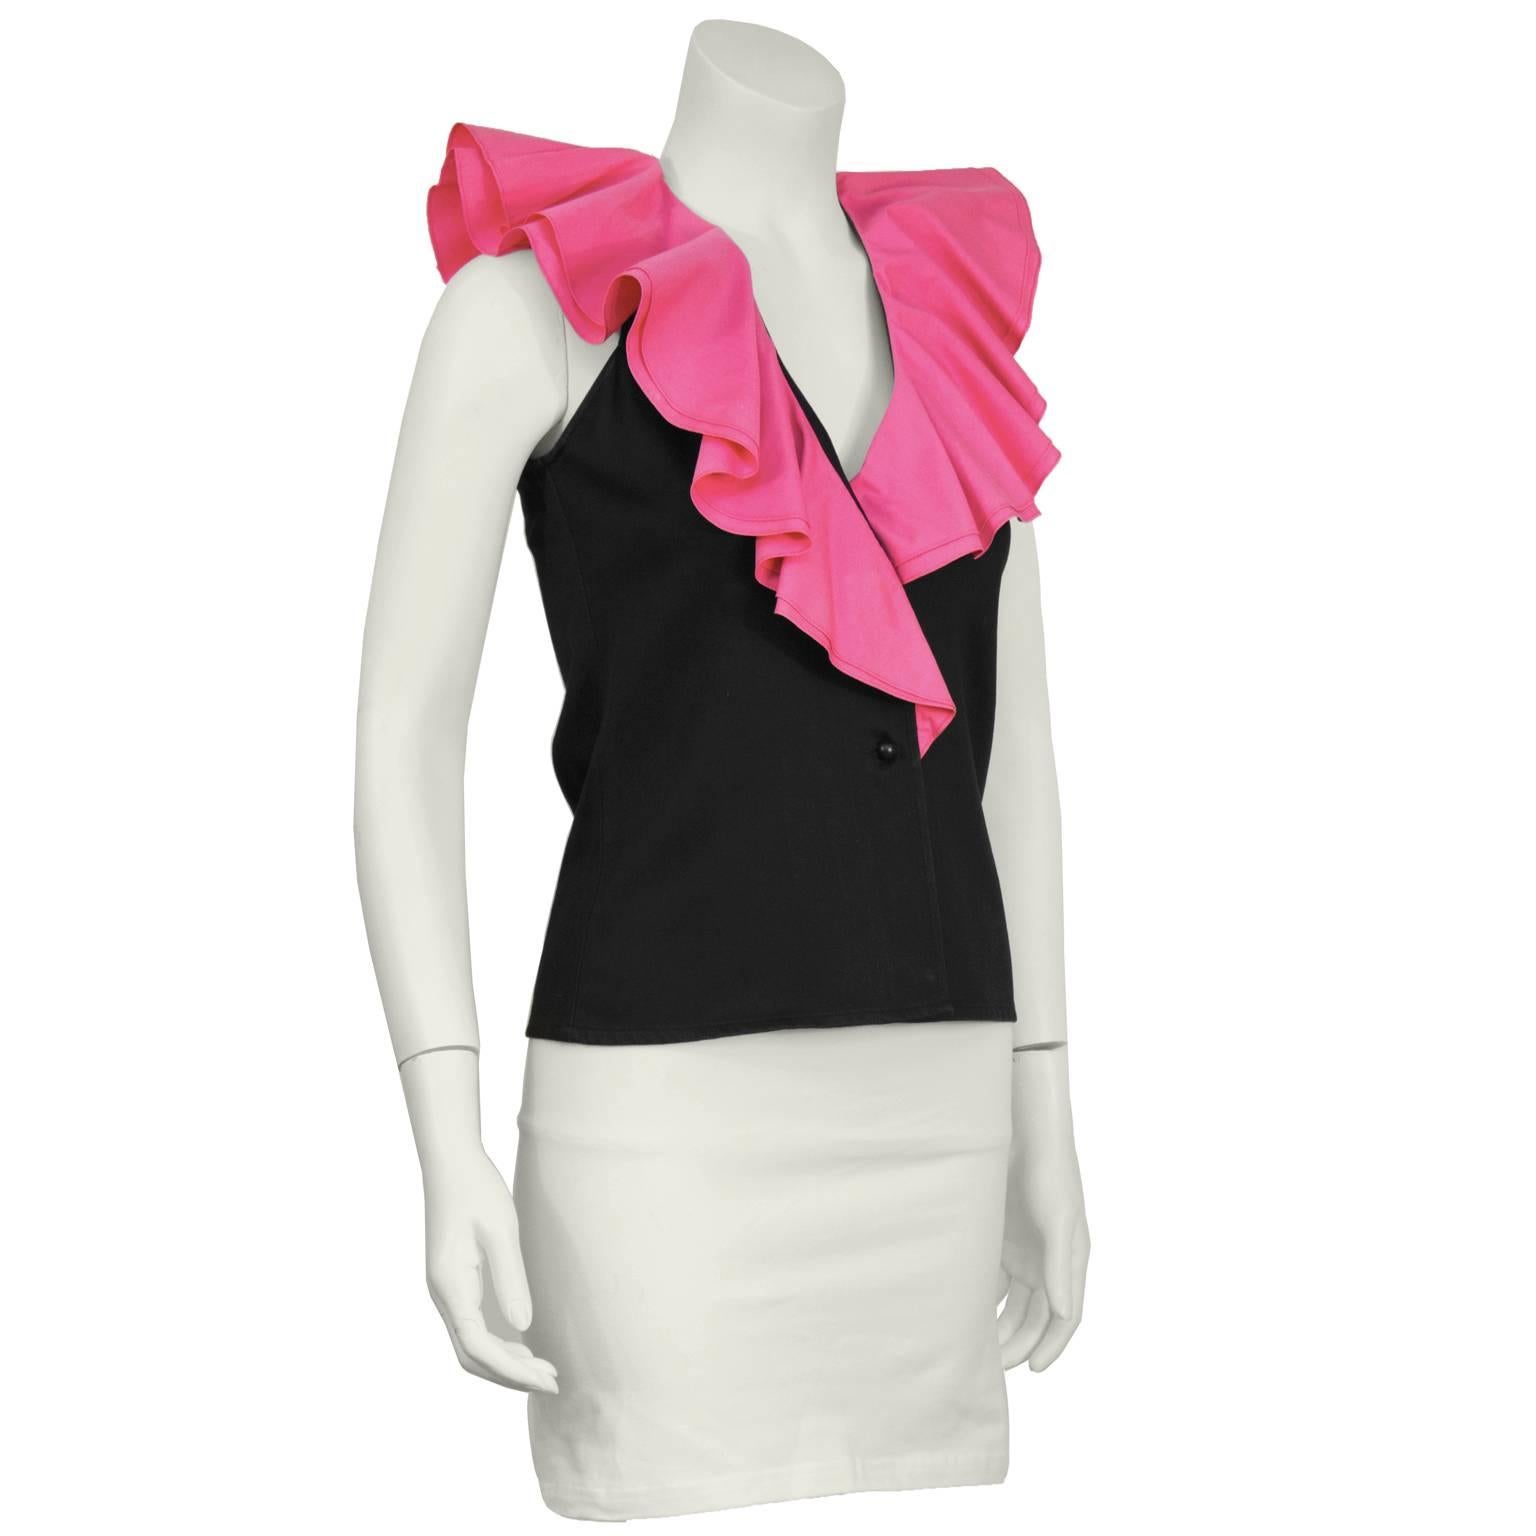 1980's Yves Saint Laurent black sleeveless fitted top with ruffles. Black cotton vest top has vibrant double layered pink ruffles cascading to the middle of bodice. Excellent condition. Fits like a US size 2-4.